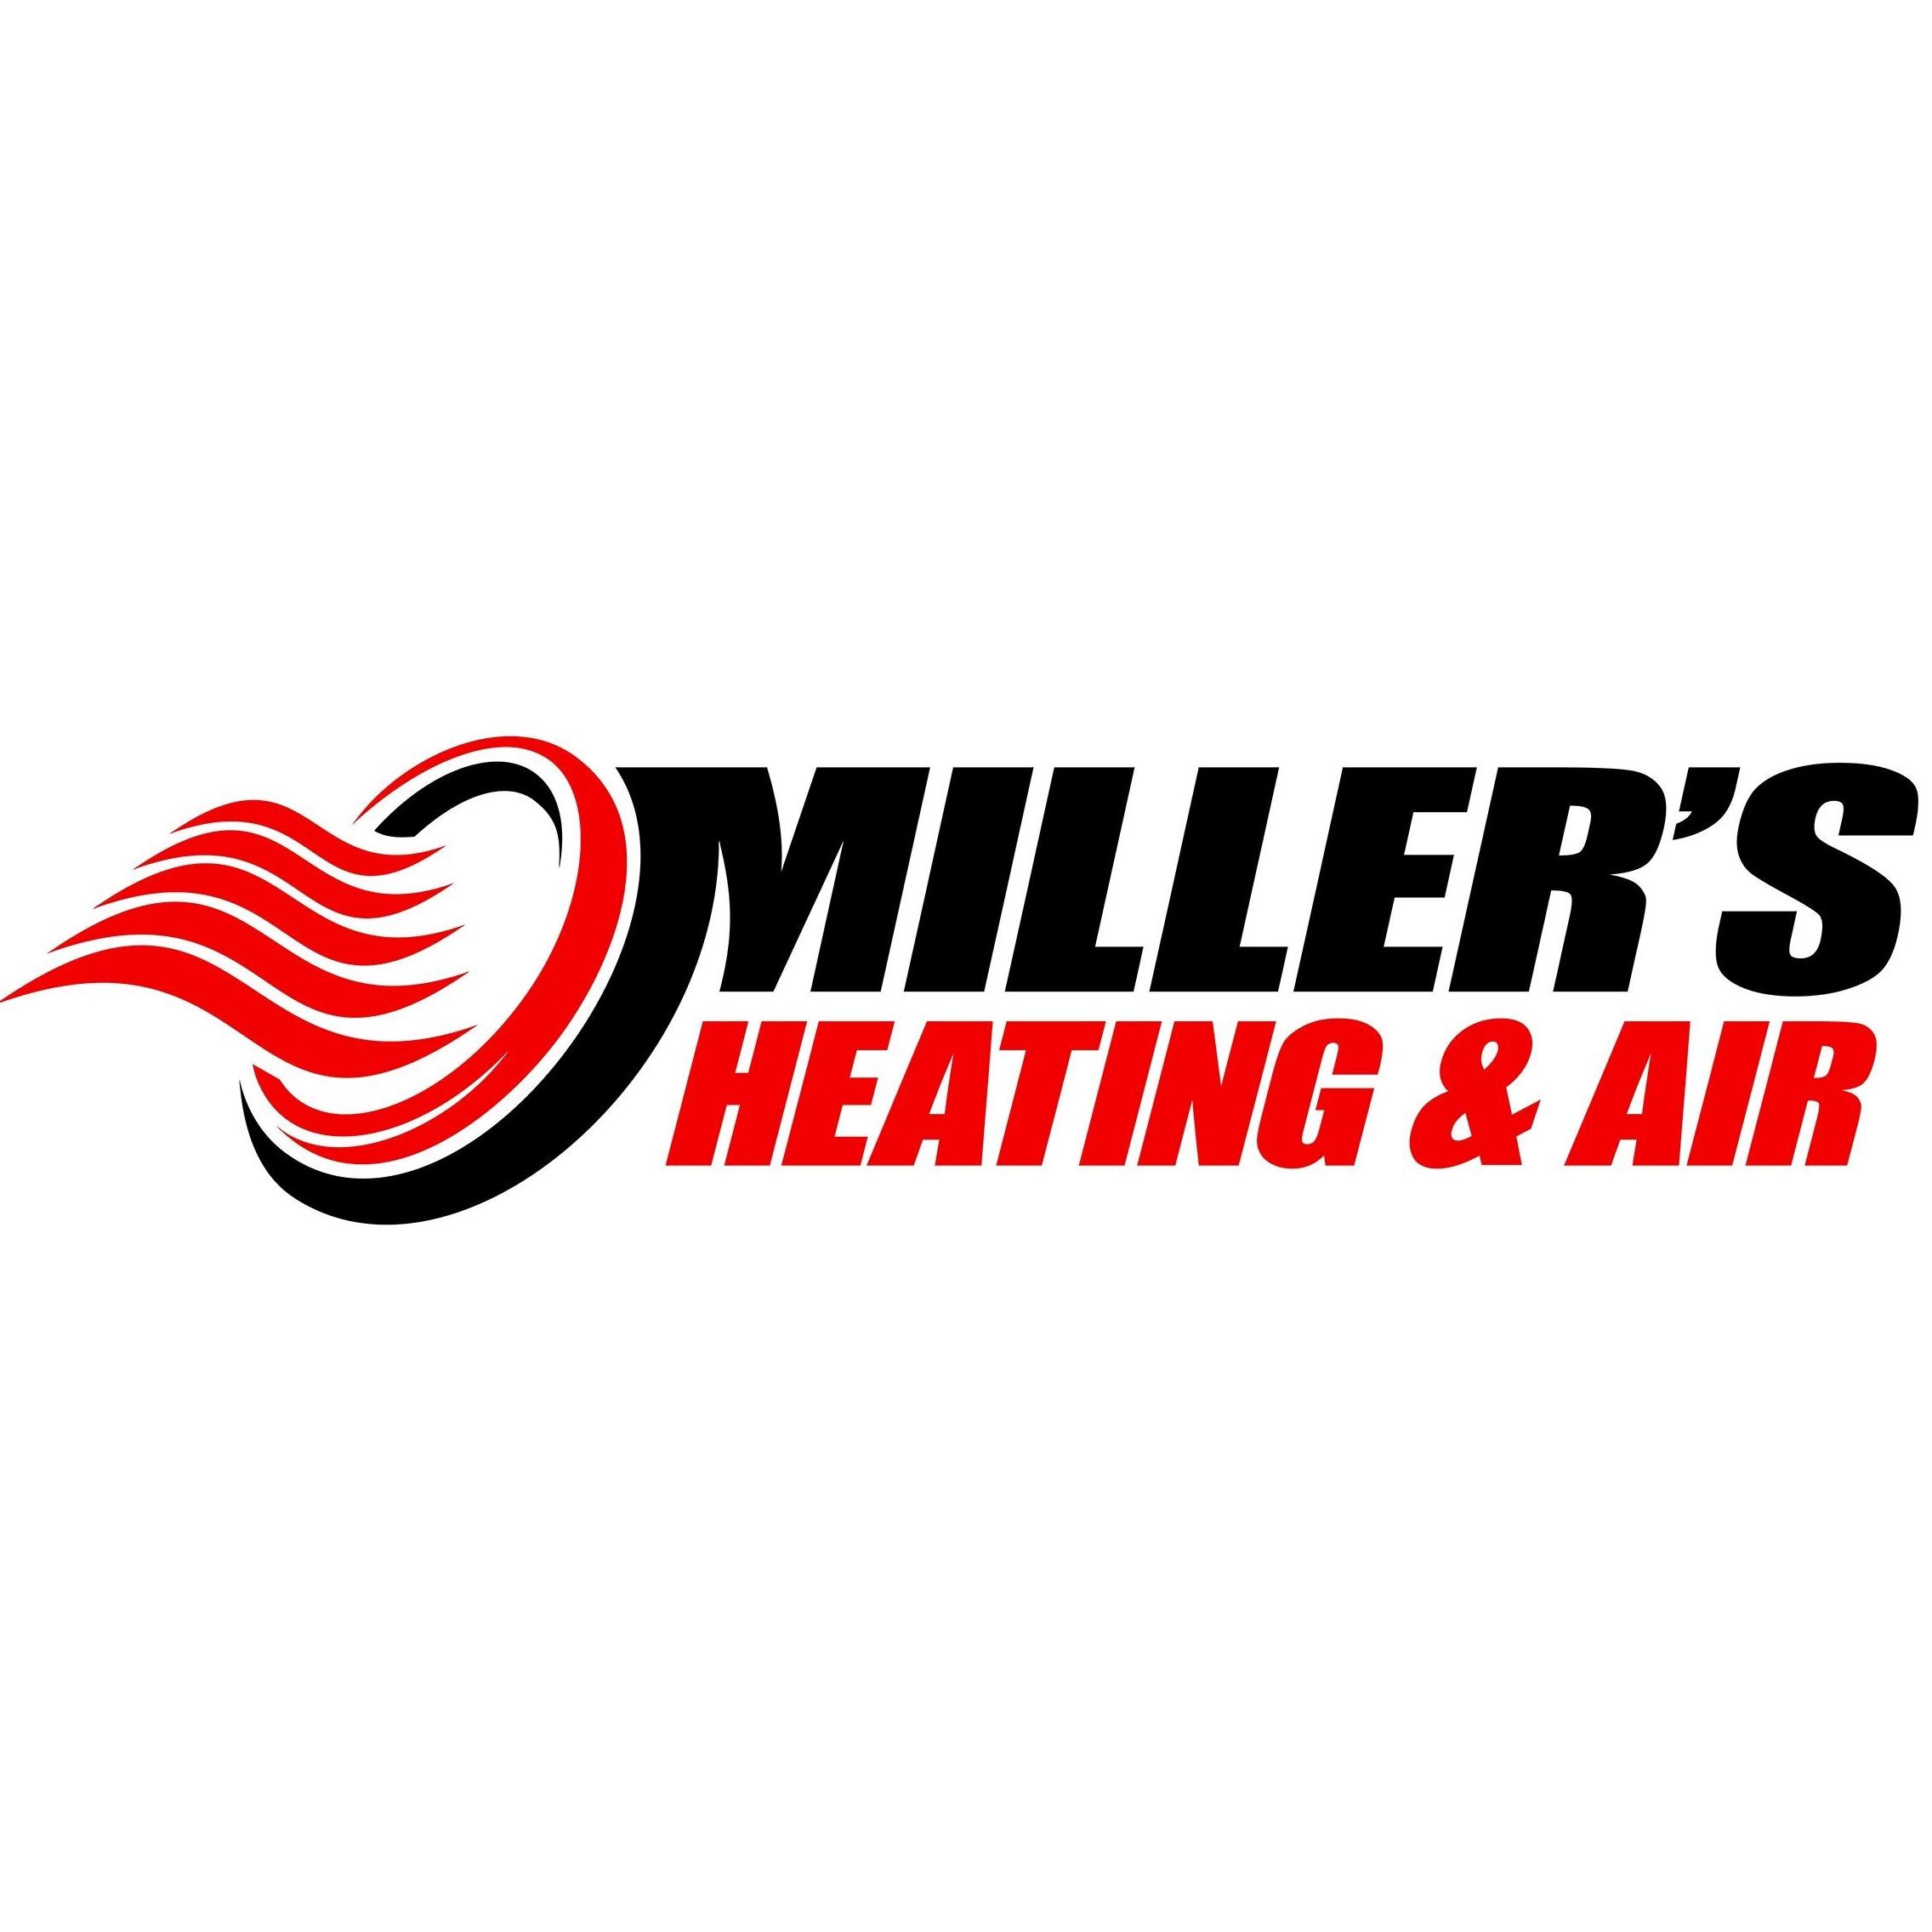 Miller's Heating & Air - Vancouver, WA 98684 - (360)695-6500 | ShowMeLocal.com